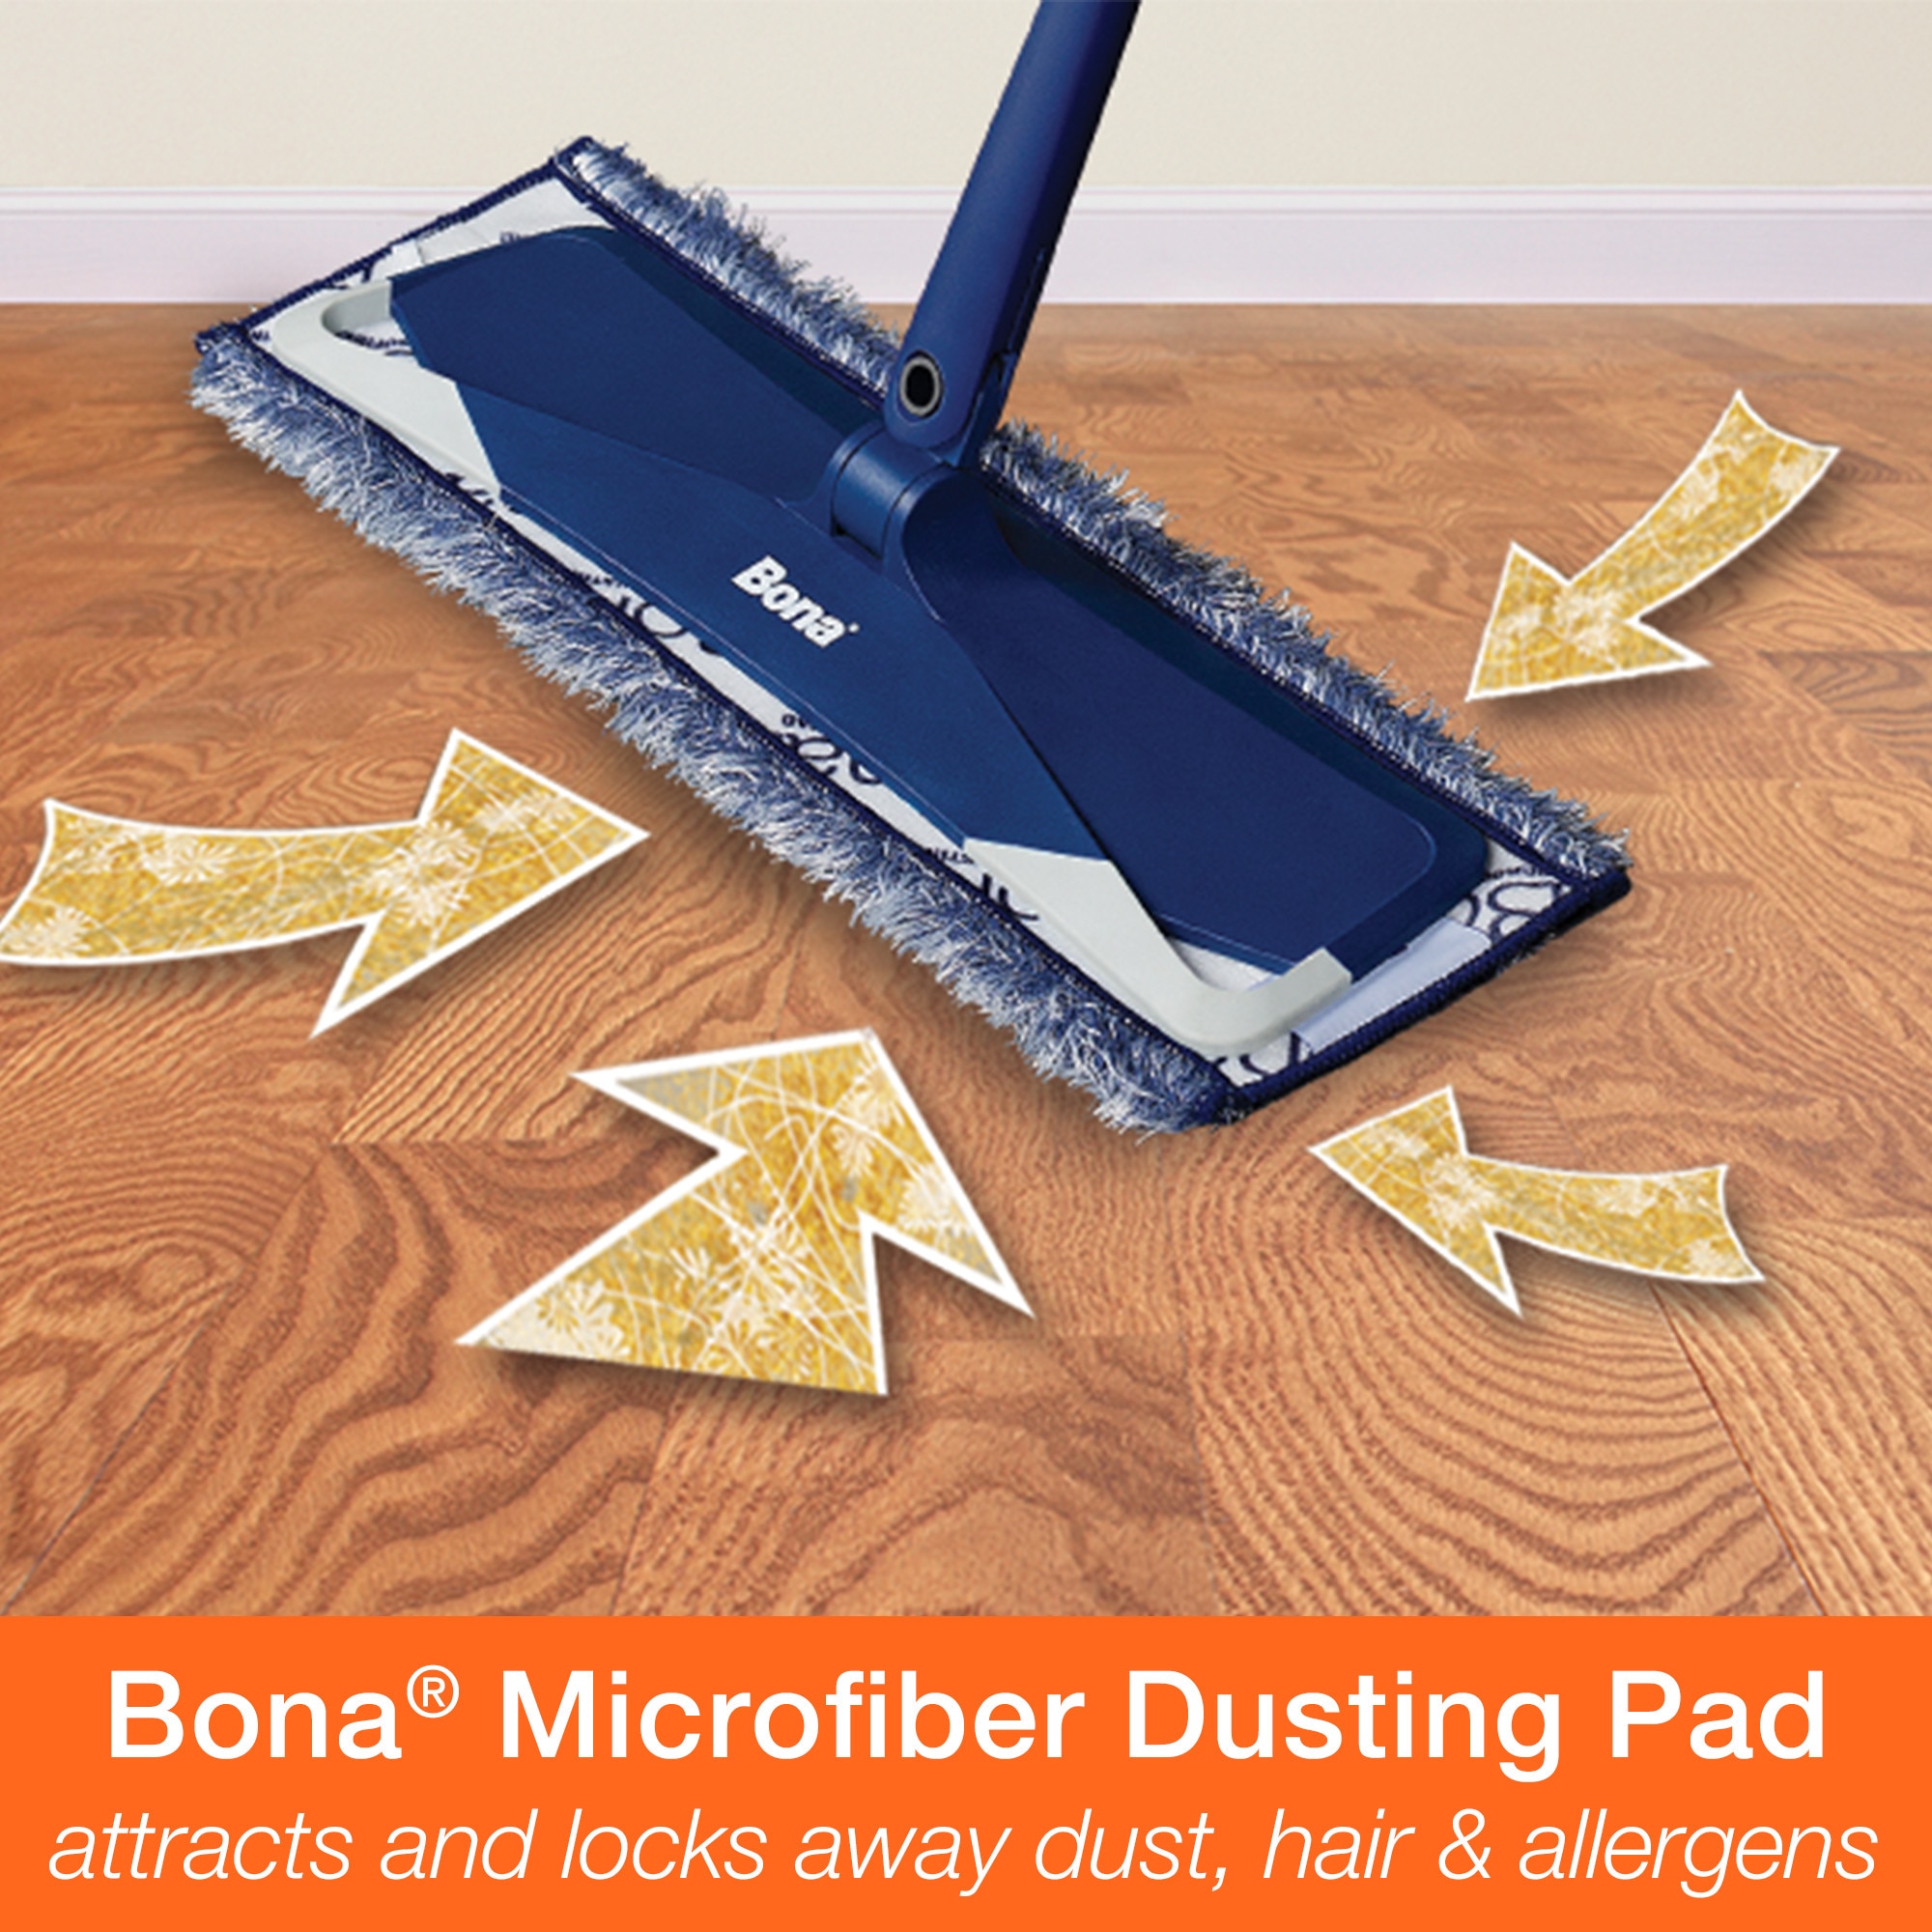 Bona Reusable Microfiber Mop Pad, Machine Washable, Electrostatic Action,  Pet Hair and Dander Removal in the Mop Pads department at